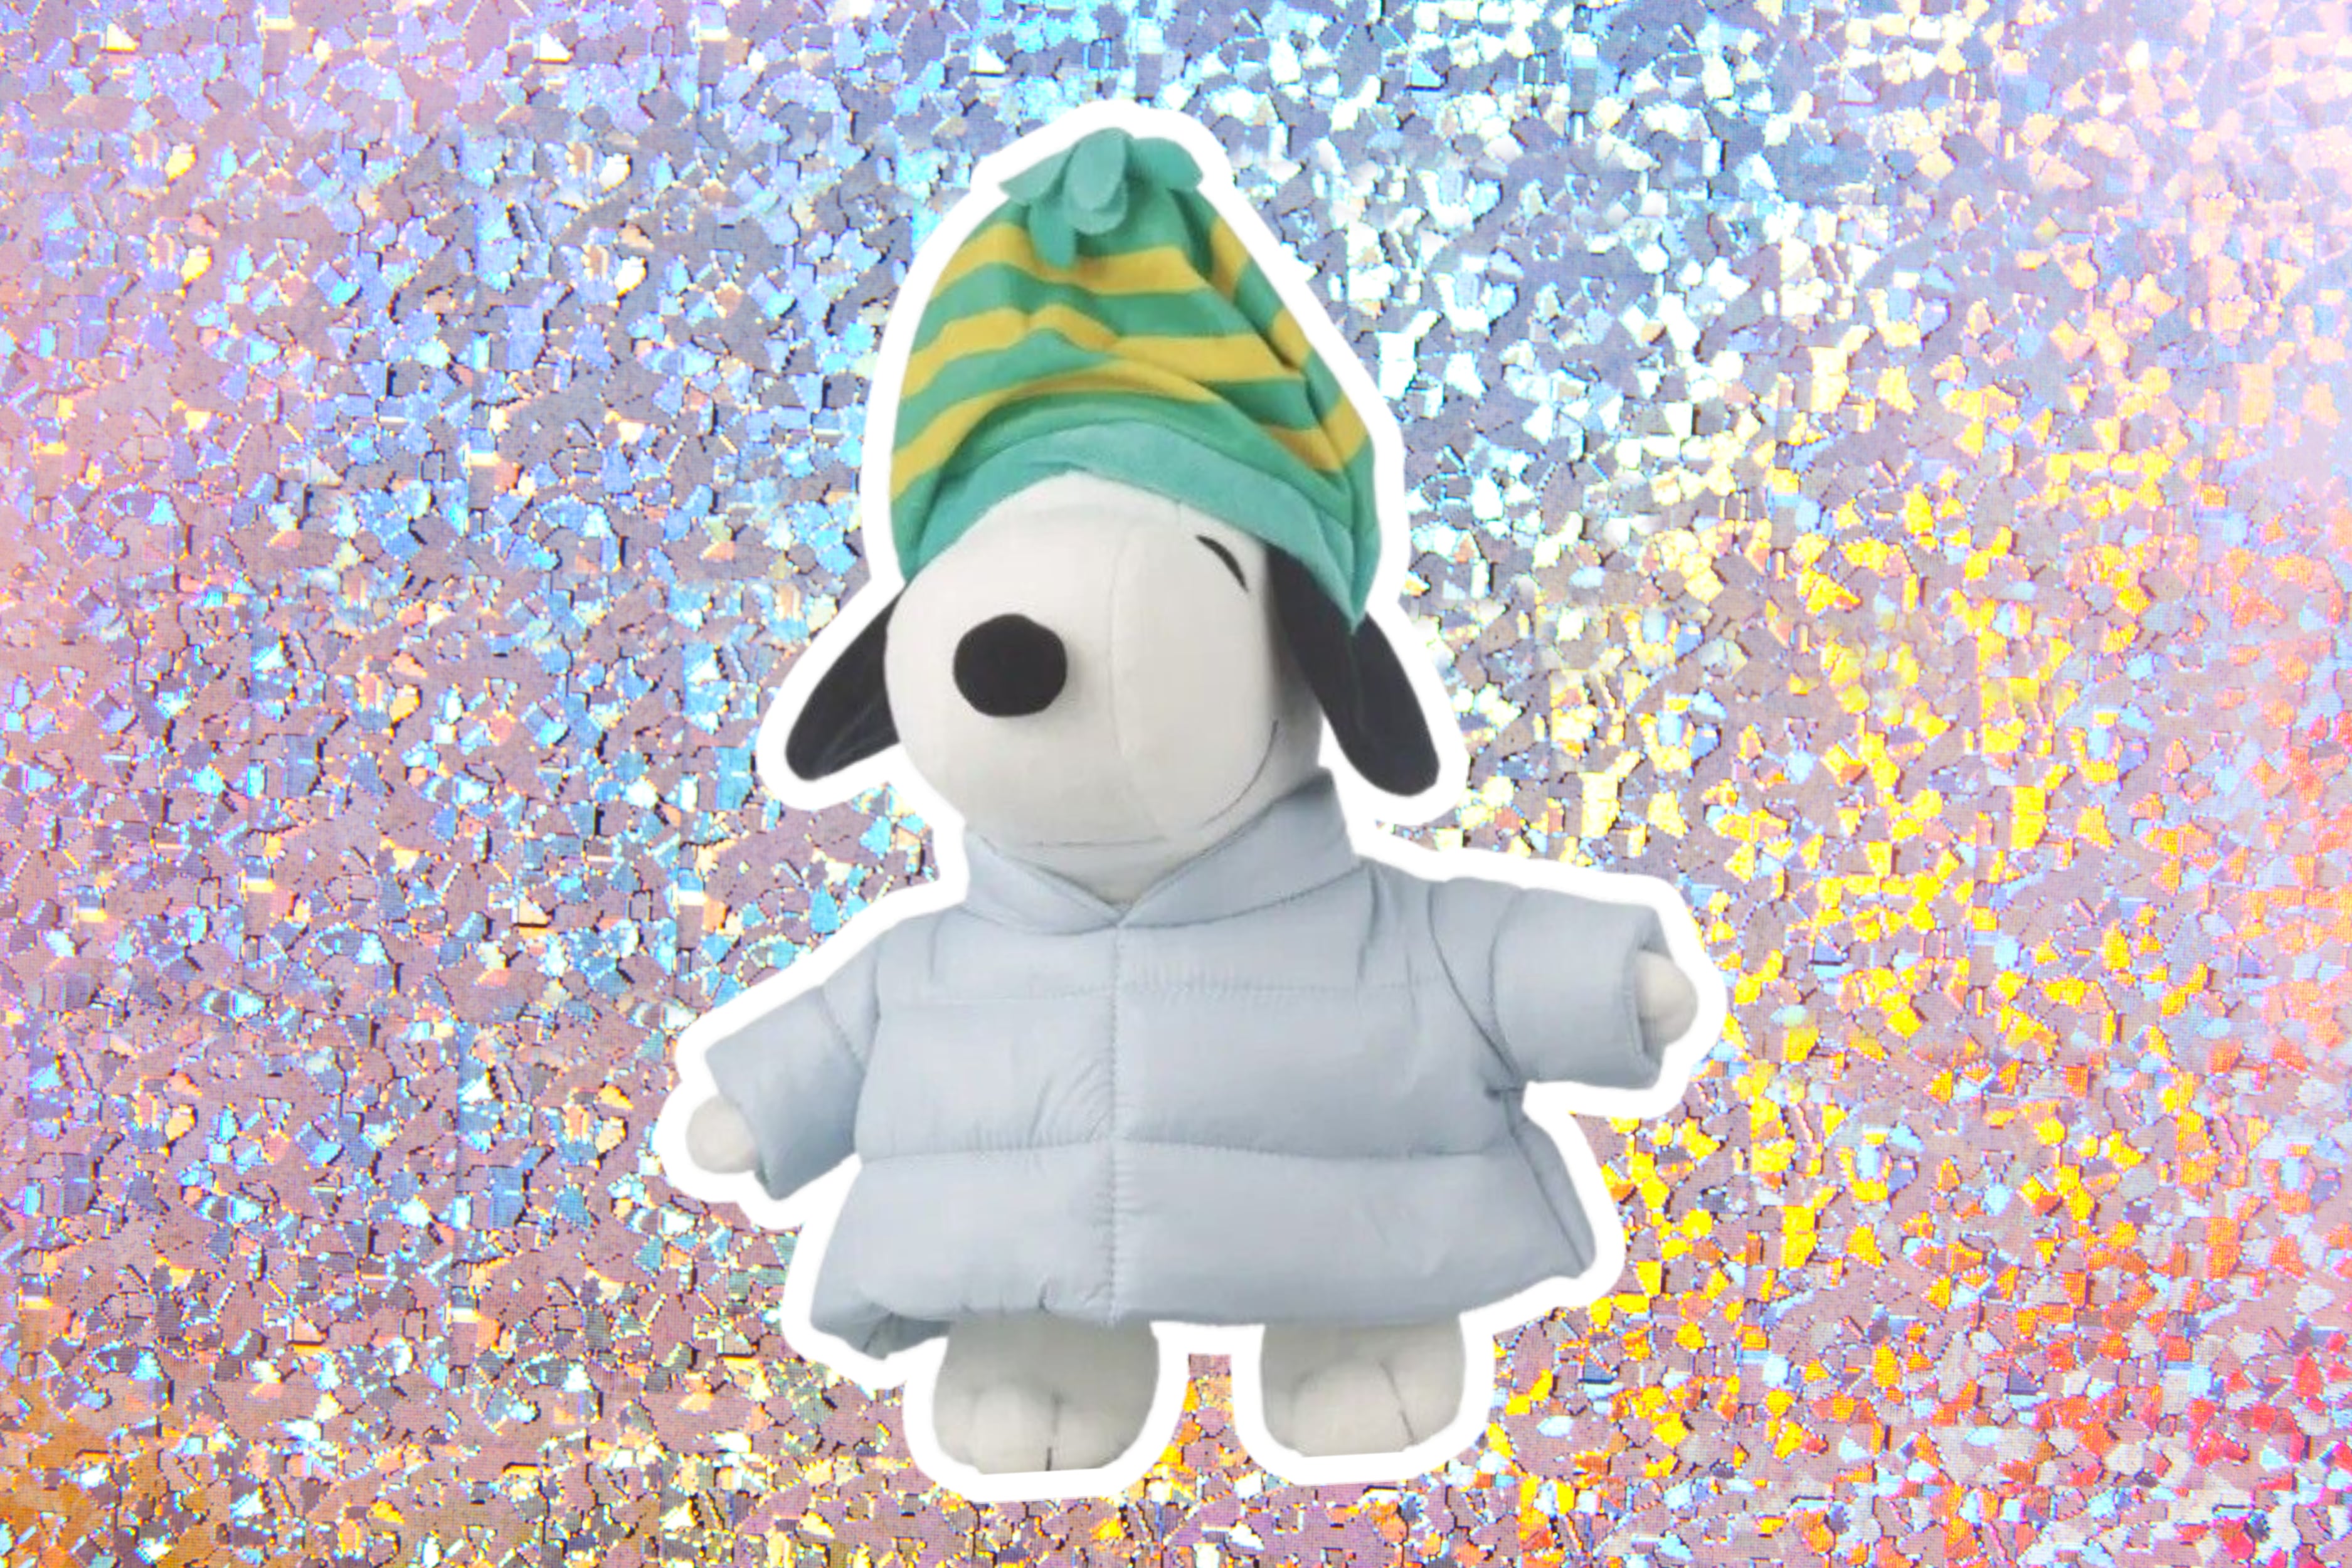 CVS' Snoopy with a puffer jacket is Christmas' hottest toy